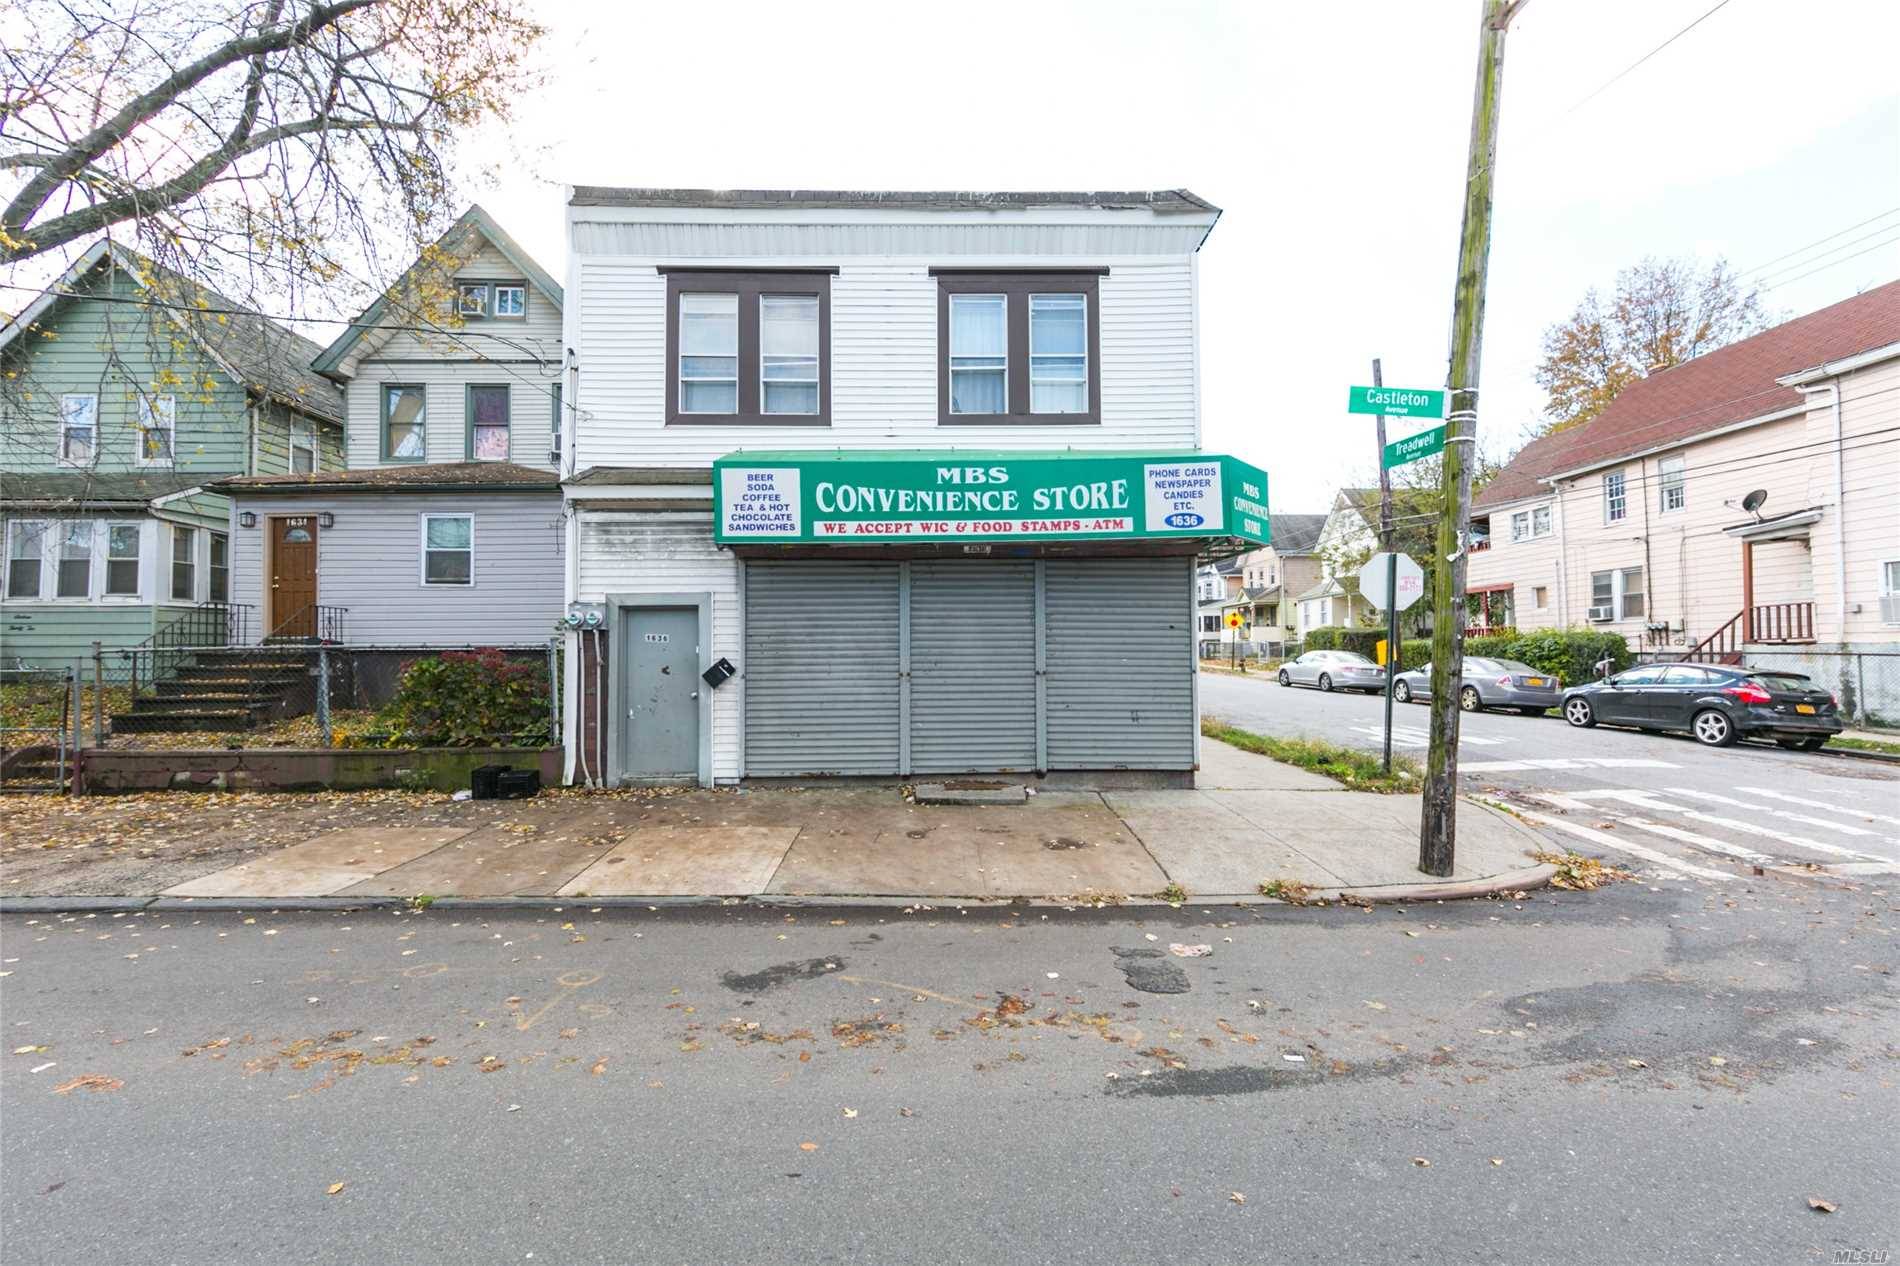 We Are Pleased To Offer For Sale 1636 Castleton Avenue In The Port Richmond Section Of Staten Island.